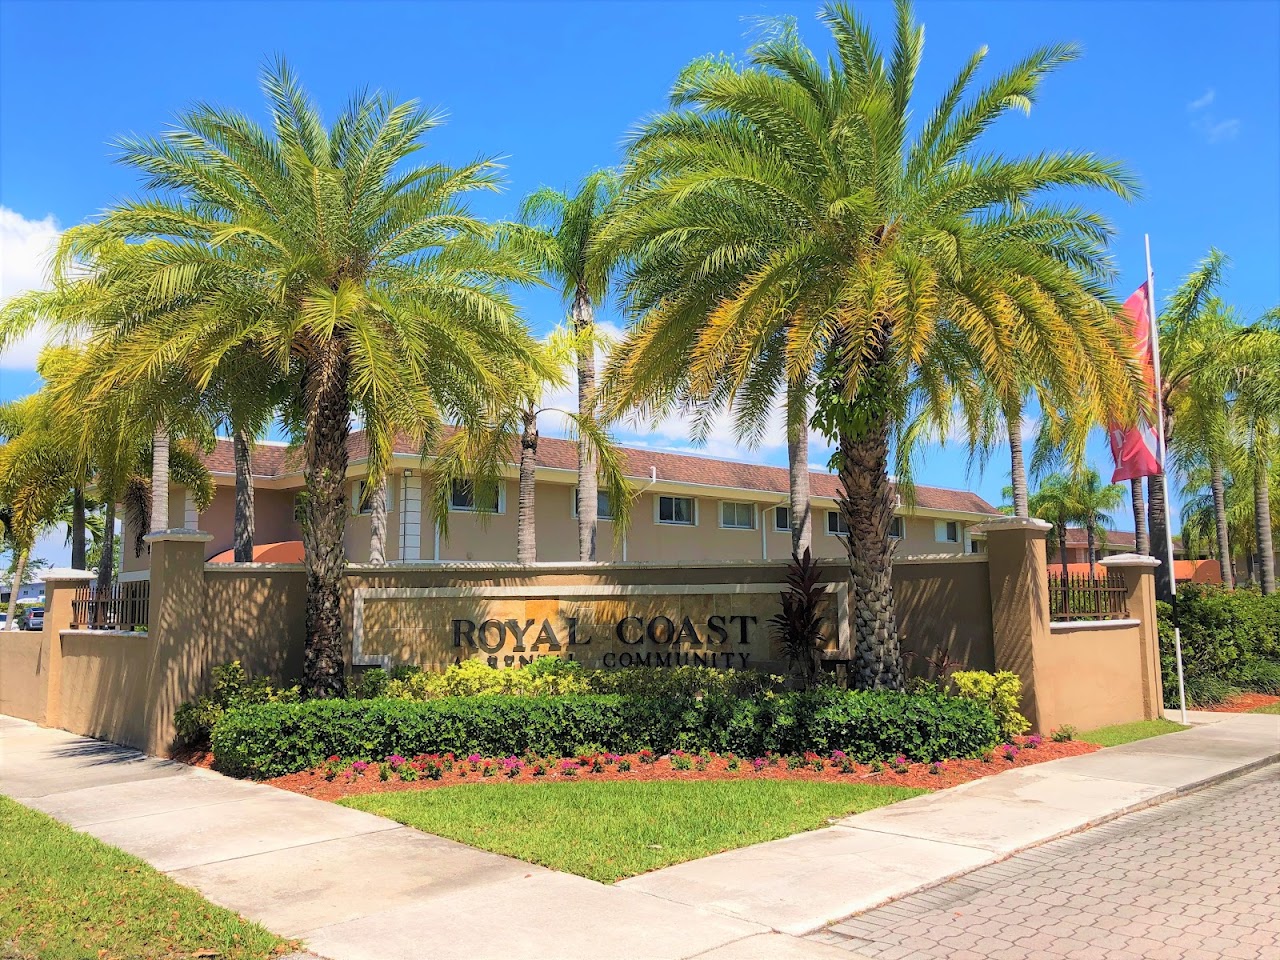 Photo of ROYAL COAST. Affordable housing located at 9001 SW 156TH ST PALMETTO BAY, FL 33157